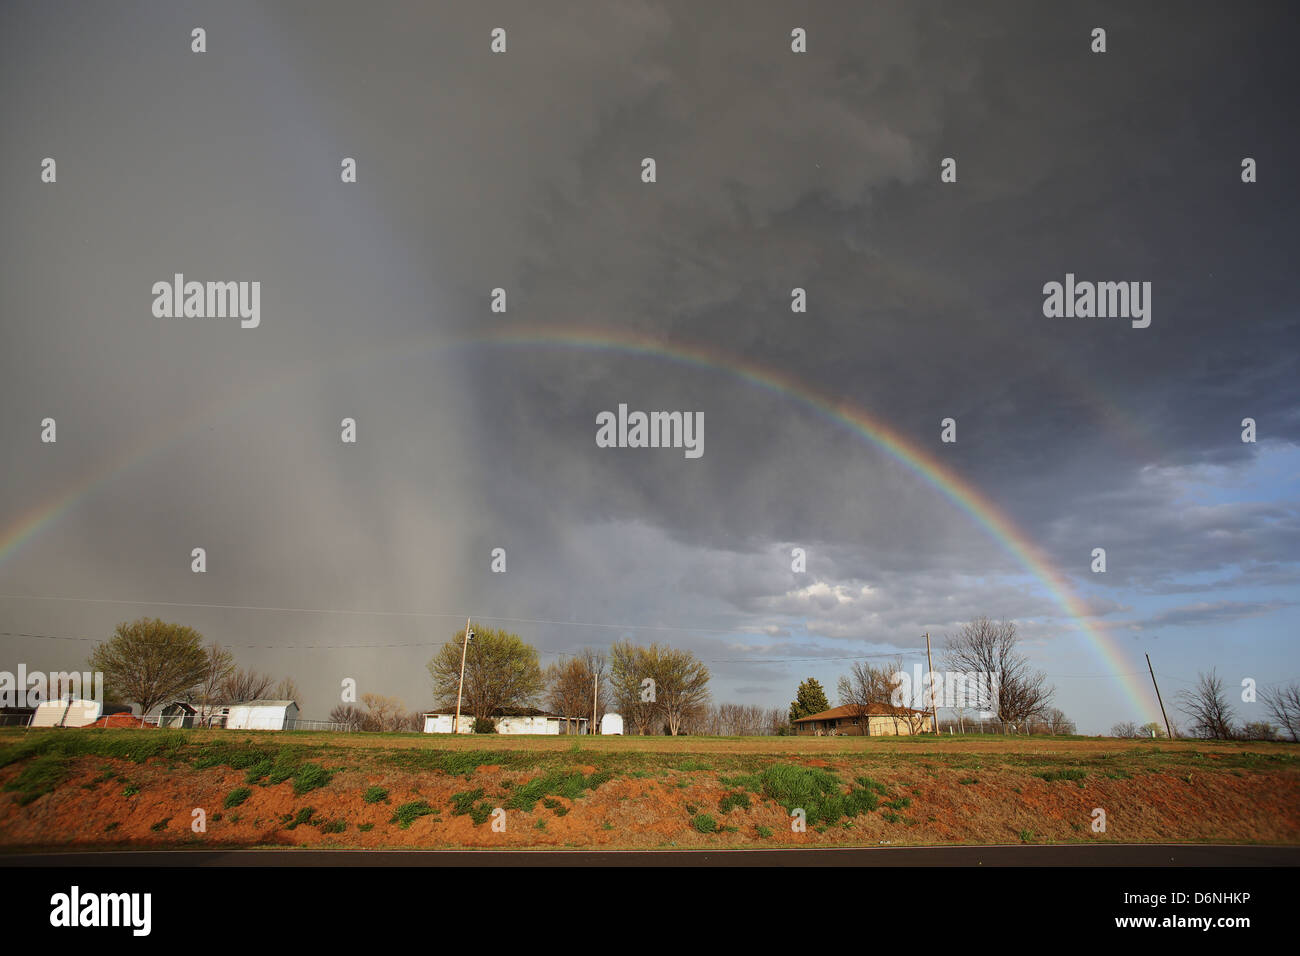 A double rainbow in a storm cloud over homes in rural Oklahoma. Stock Photo